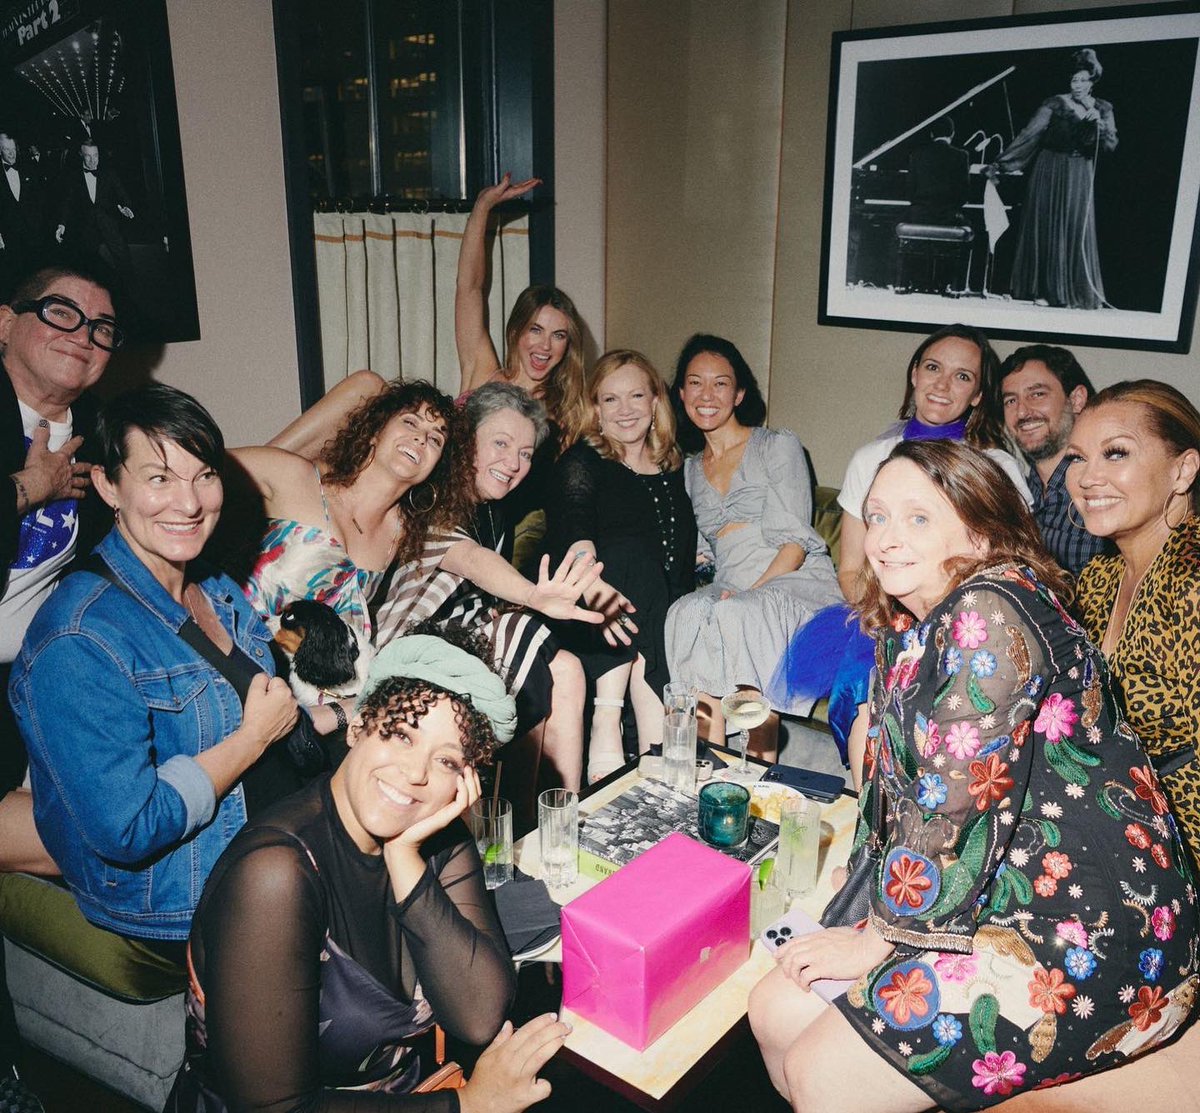 And after the show it's the after party...Thank you to #pebblebarnyc, #acespizzaspot, @shakeshack & @freshvinewine for making it such a success! And of course, the cast and crew of @potusbway for celebrating! #pizzagirl 🍕